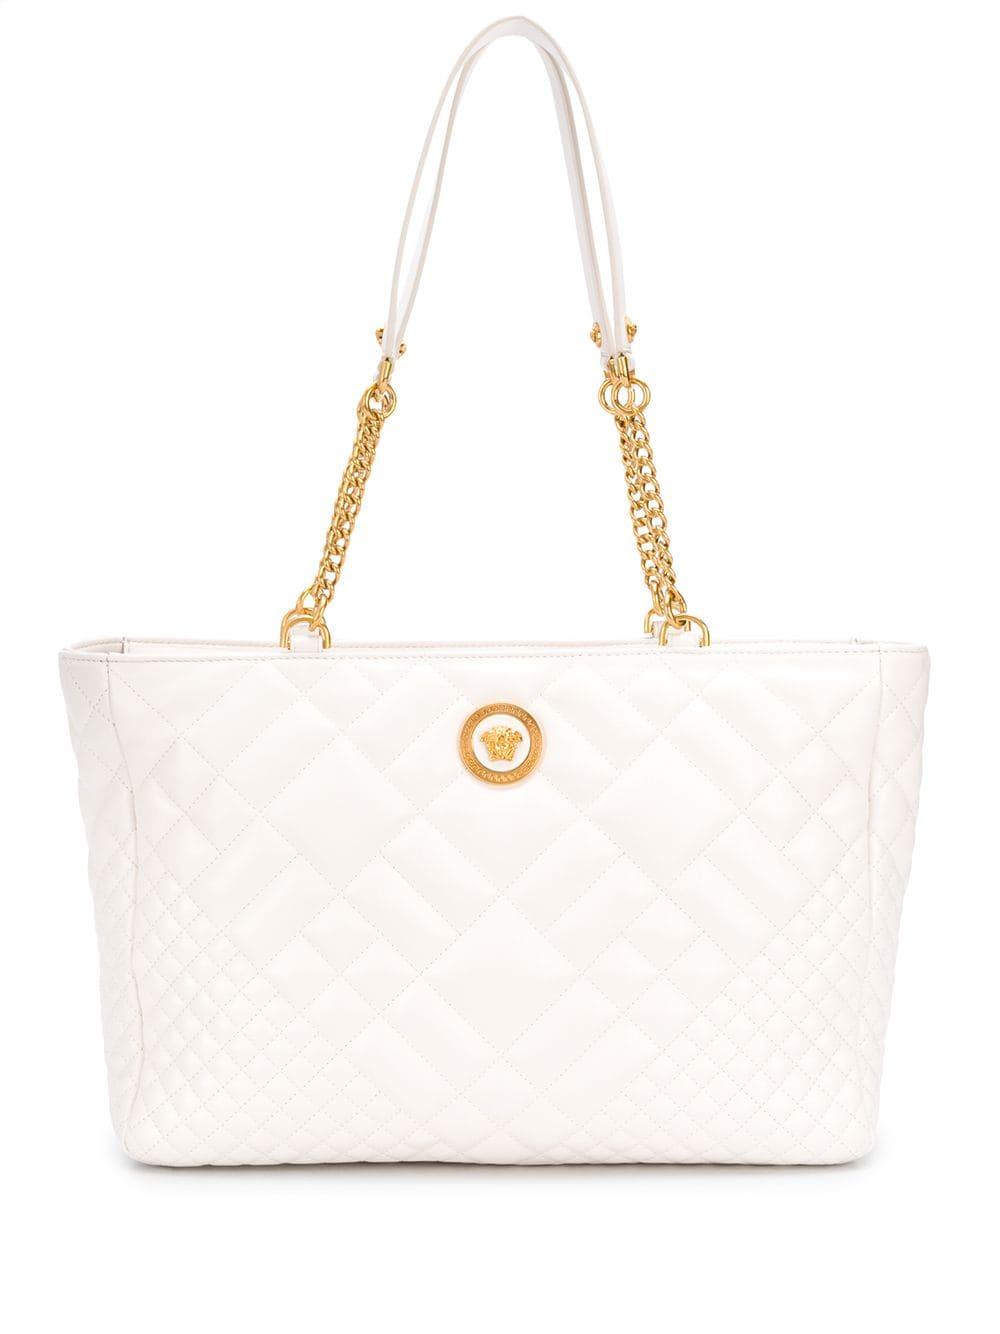 Womens Tote bags Versace Tote bags Save 52% Versace Leather Medusa-head Motif Small Tote Bag in White 